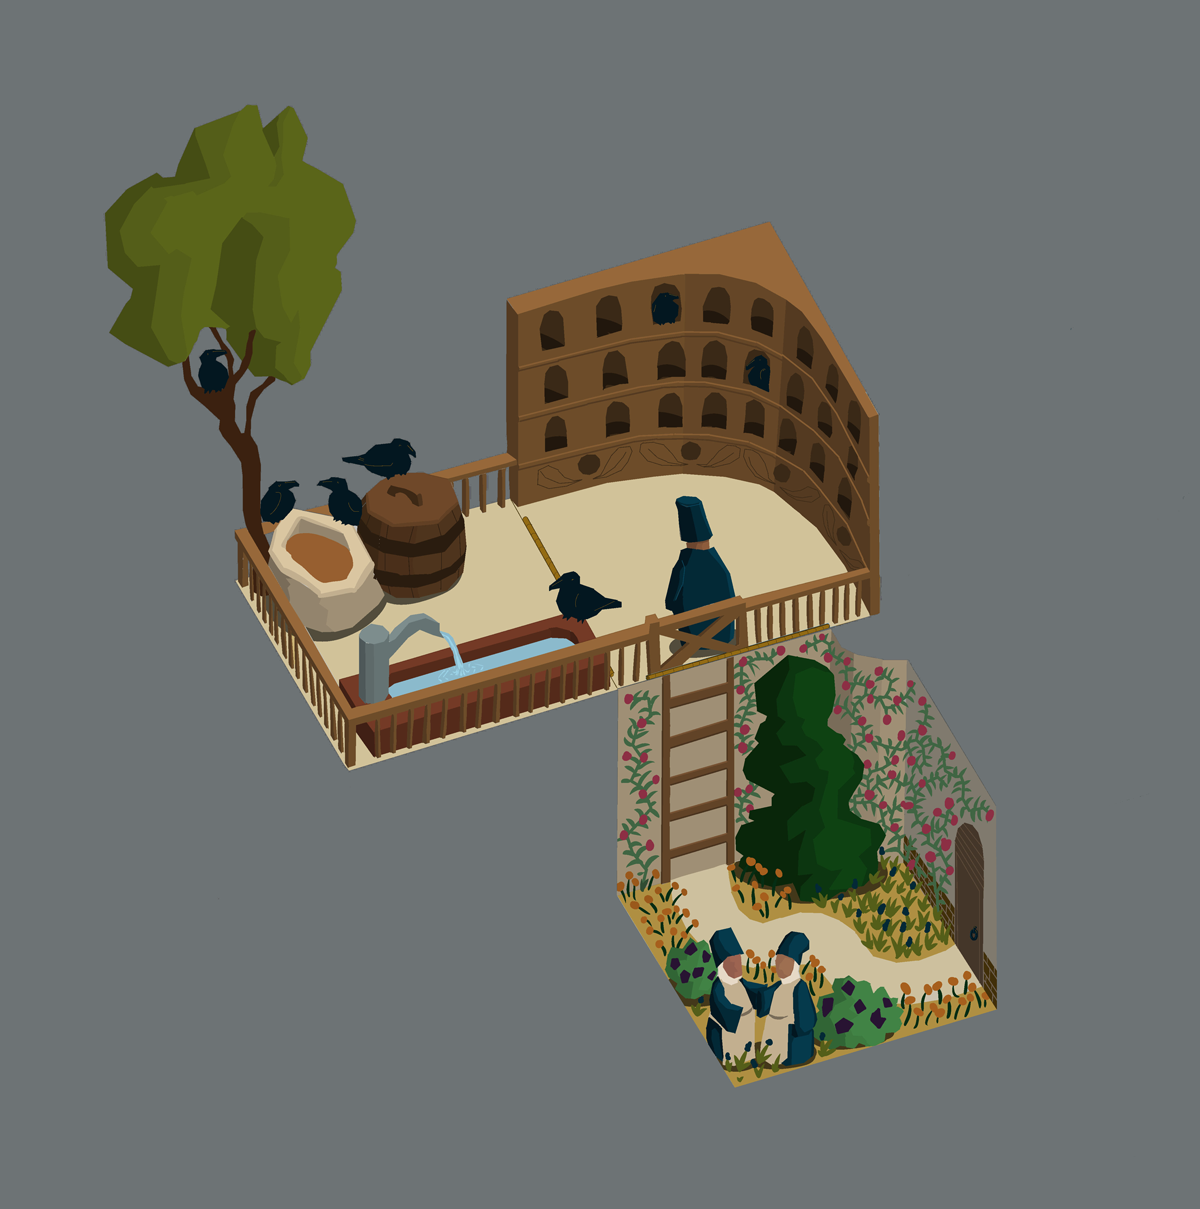 Low Poly Environment Designs – Bakery